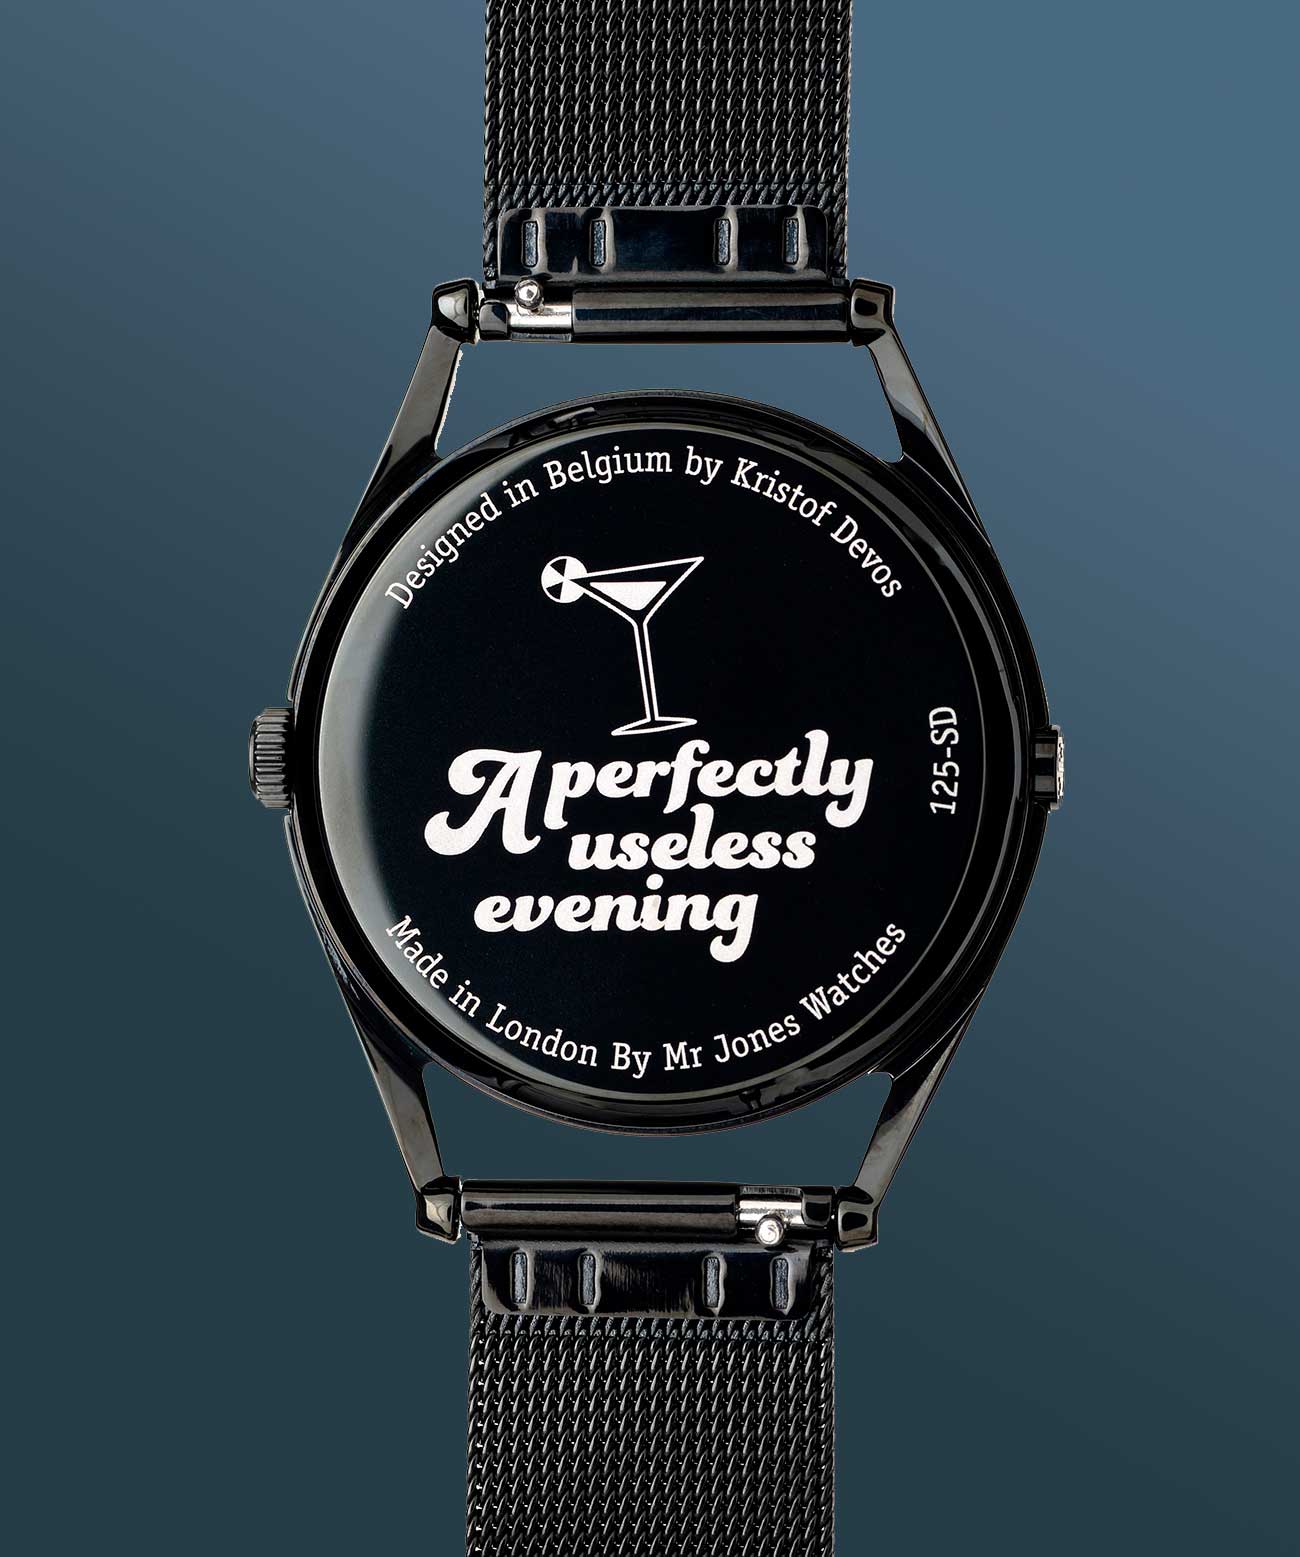 Trasera del Mr. Jones Watches A perfectly useless evening